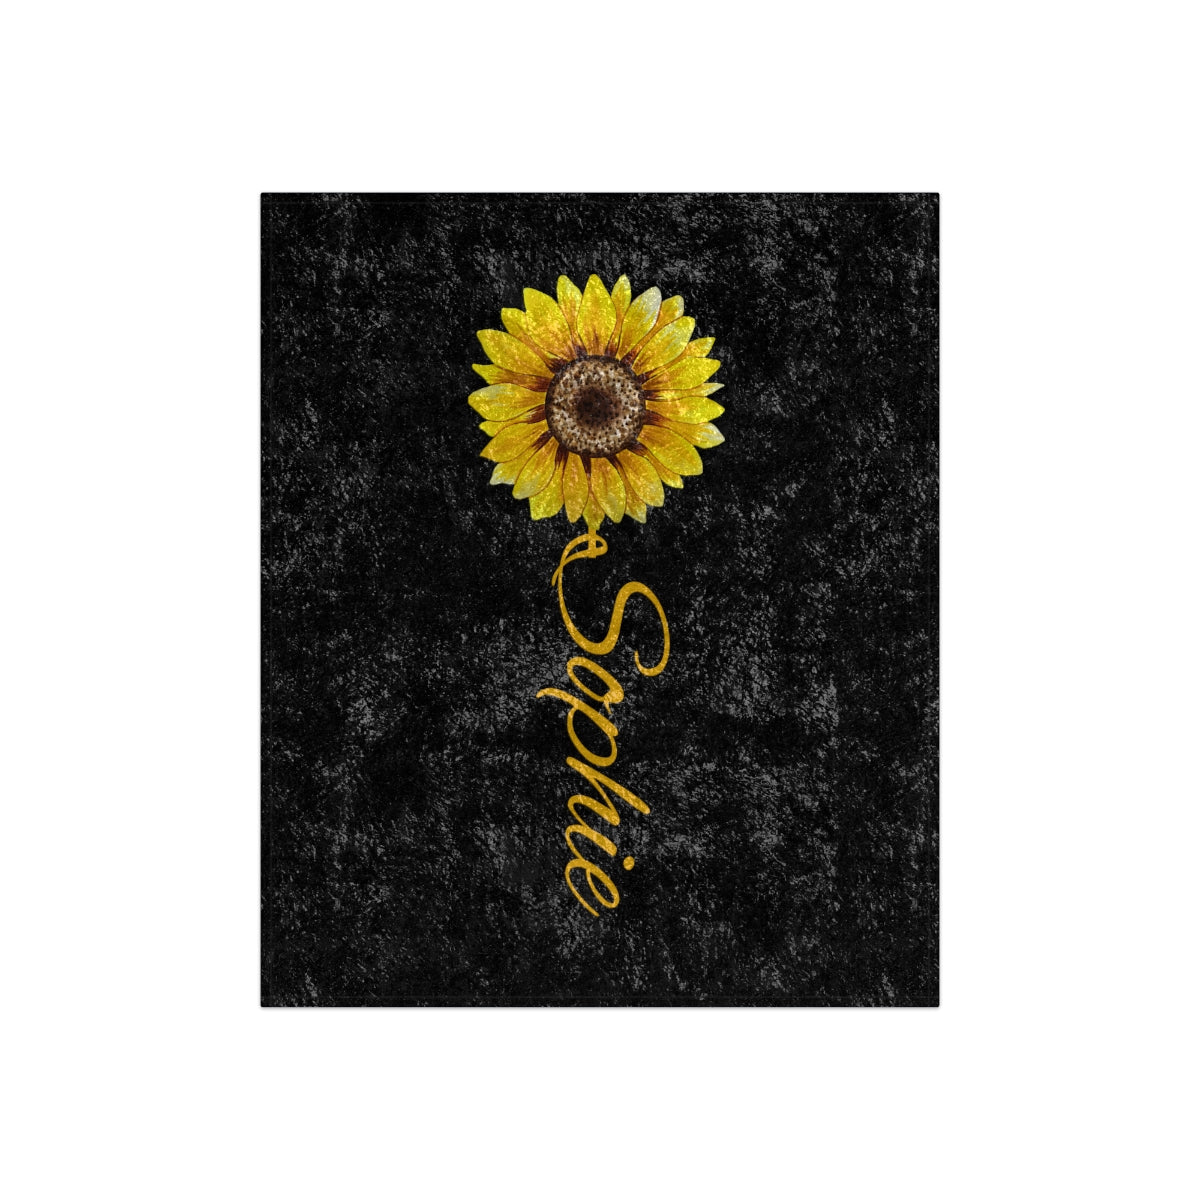 personalized sunflower blanket in black and yellow crushed velvet material